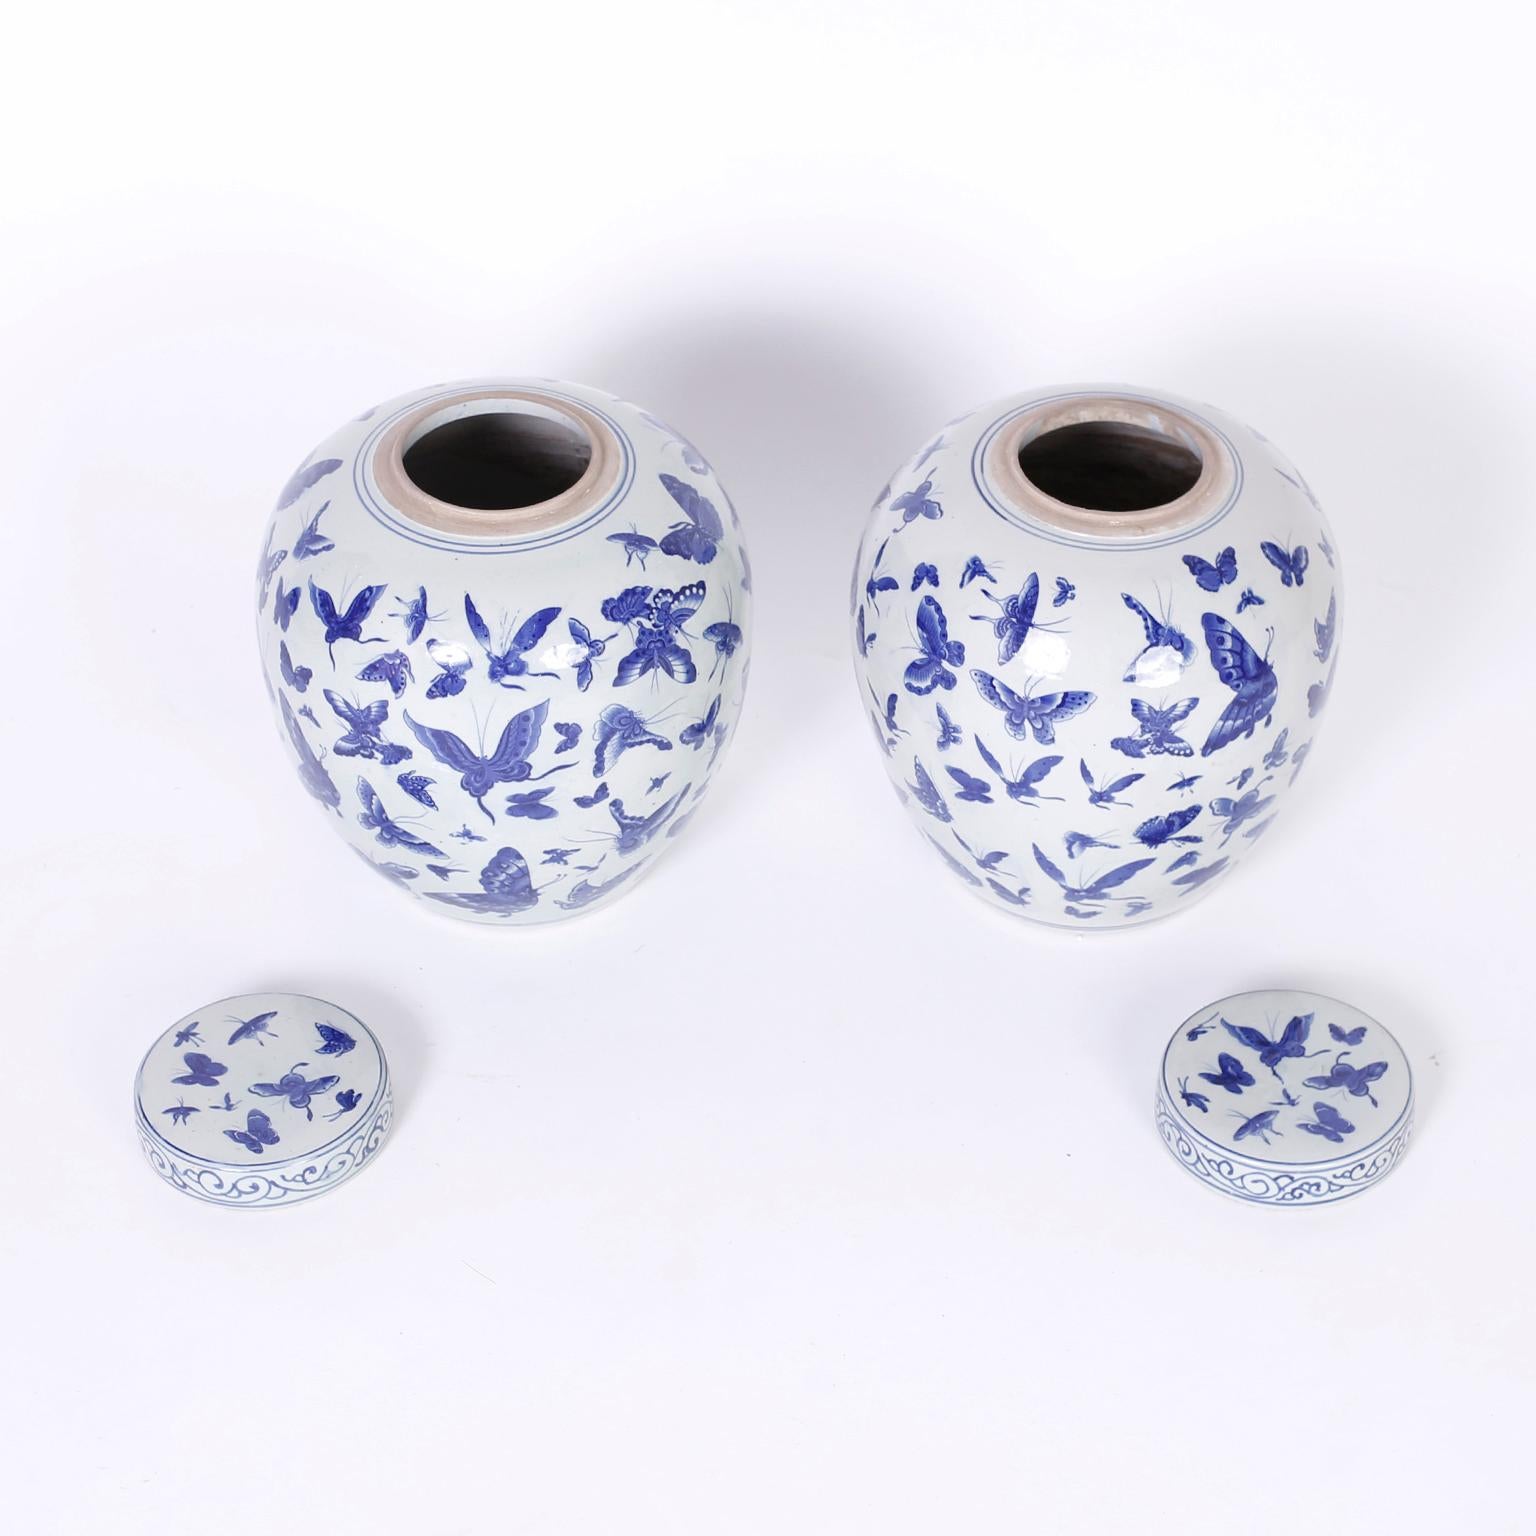 Chinoiserie Pair of Blue and White Porcelain Ginger Jars